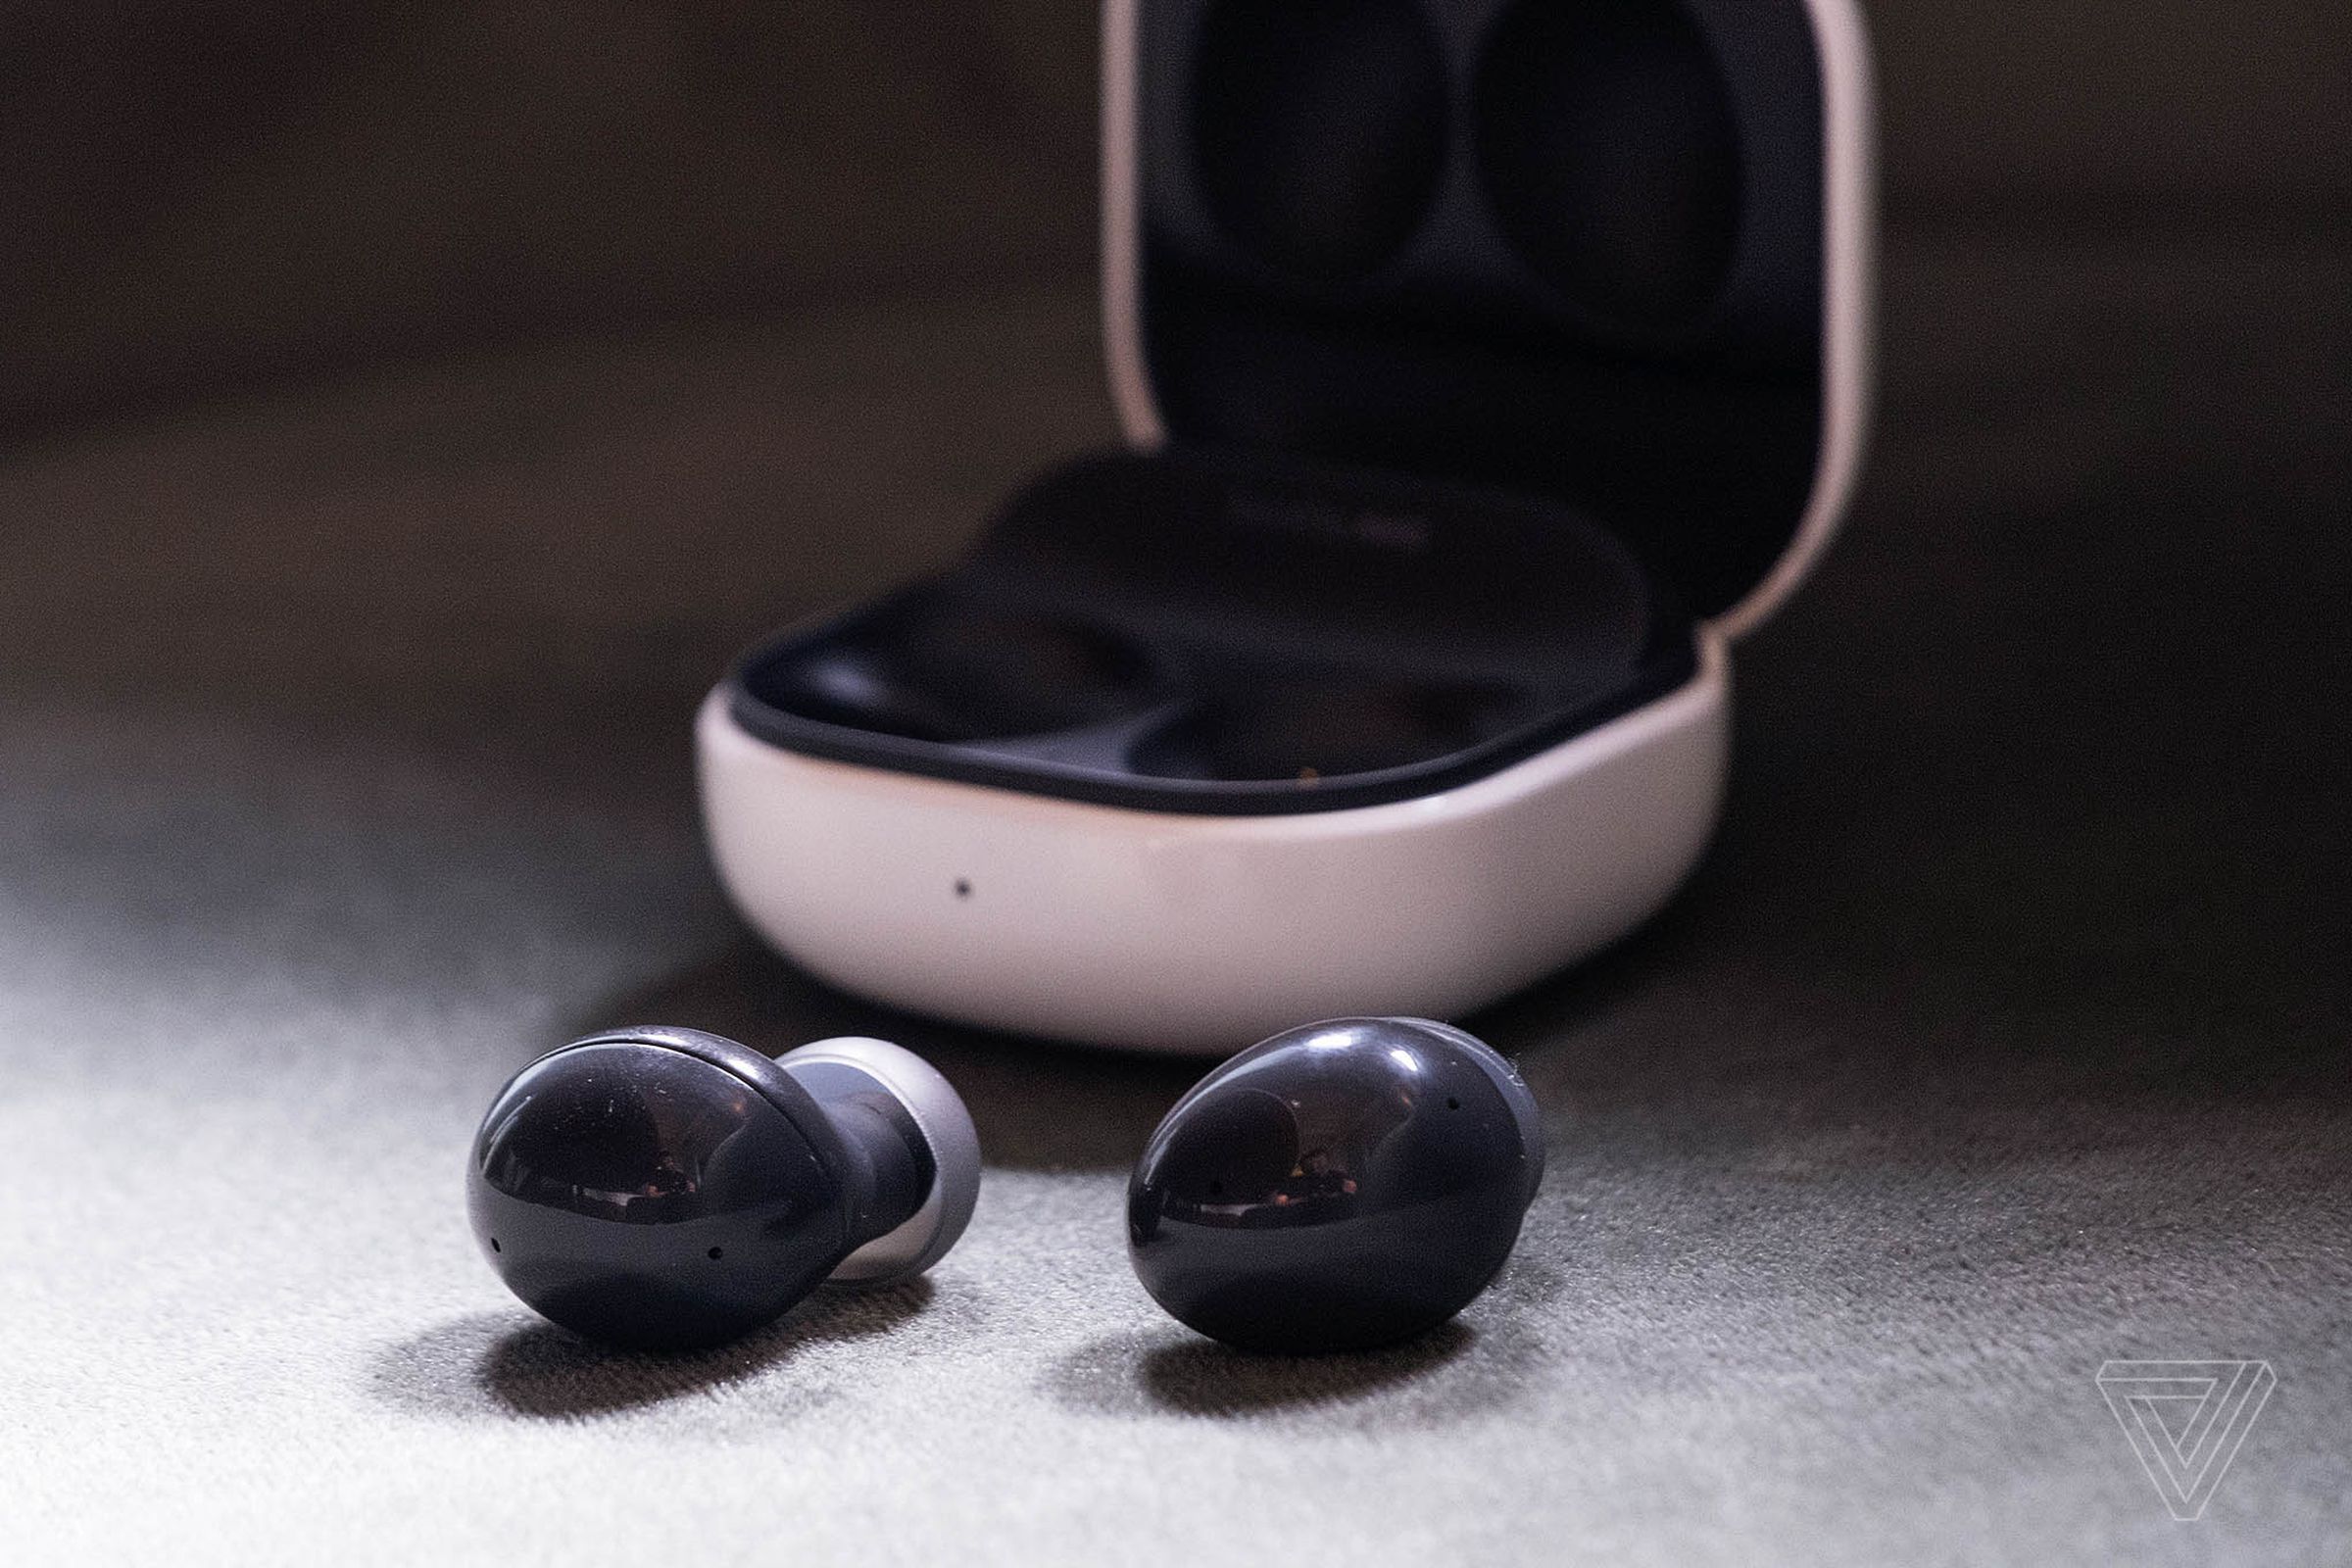 The Samsung Galaxy Buds 2 and their inverted Orero-style wireless charging case.